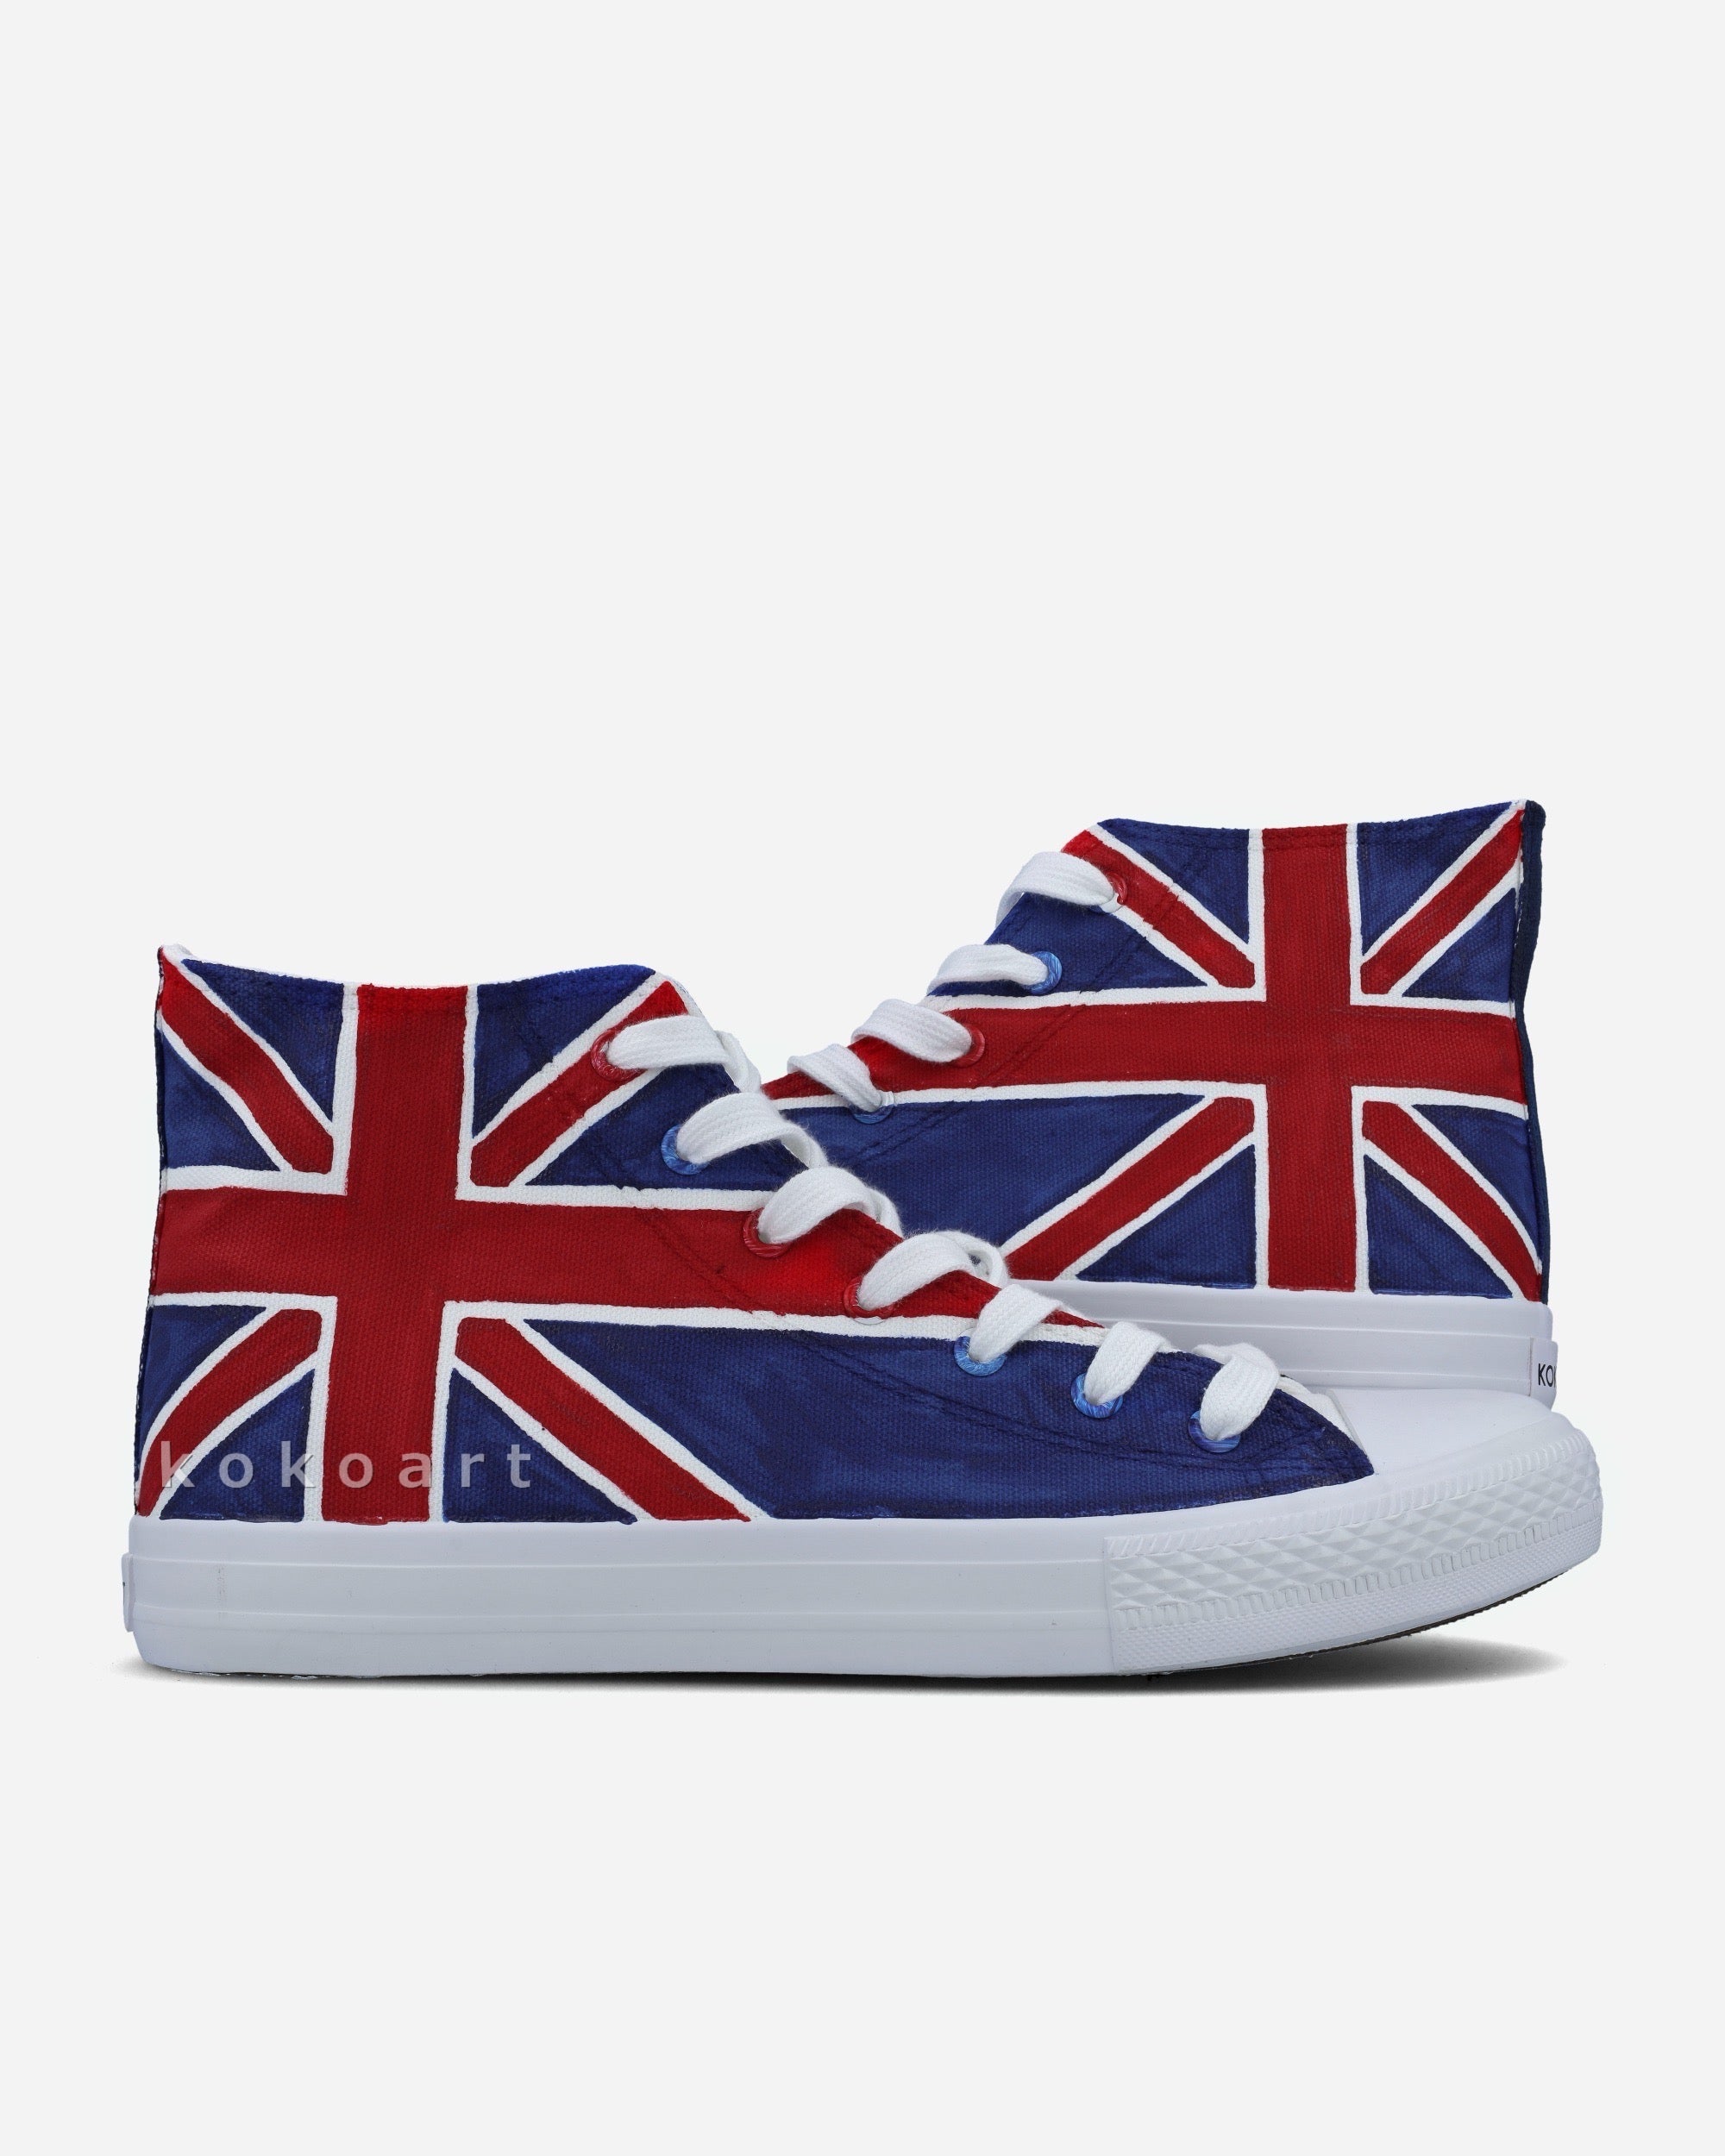 Union Jack Hand Painted Shoes